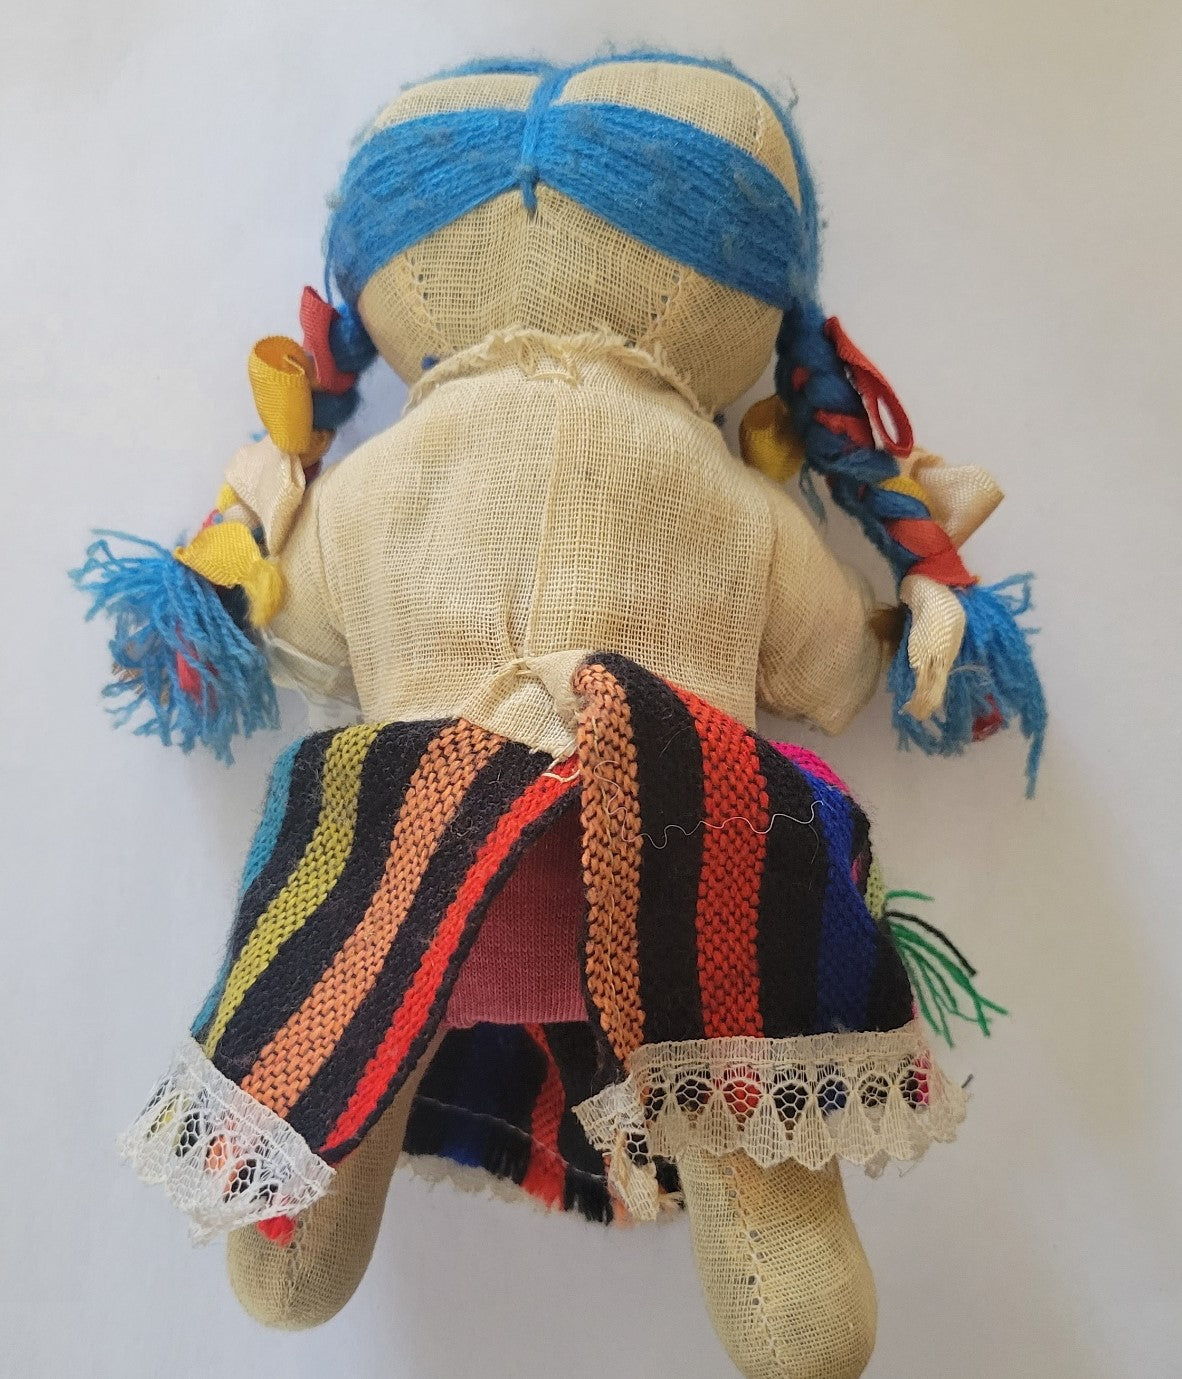 Vintage Mexican rag doll. Back view.